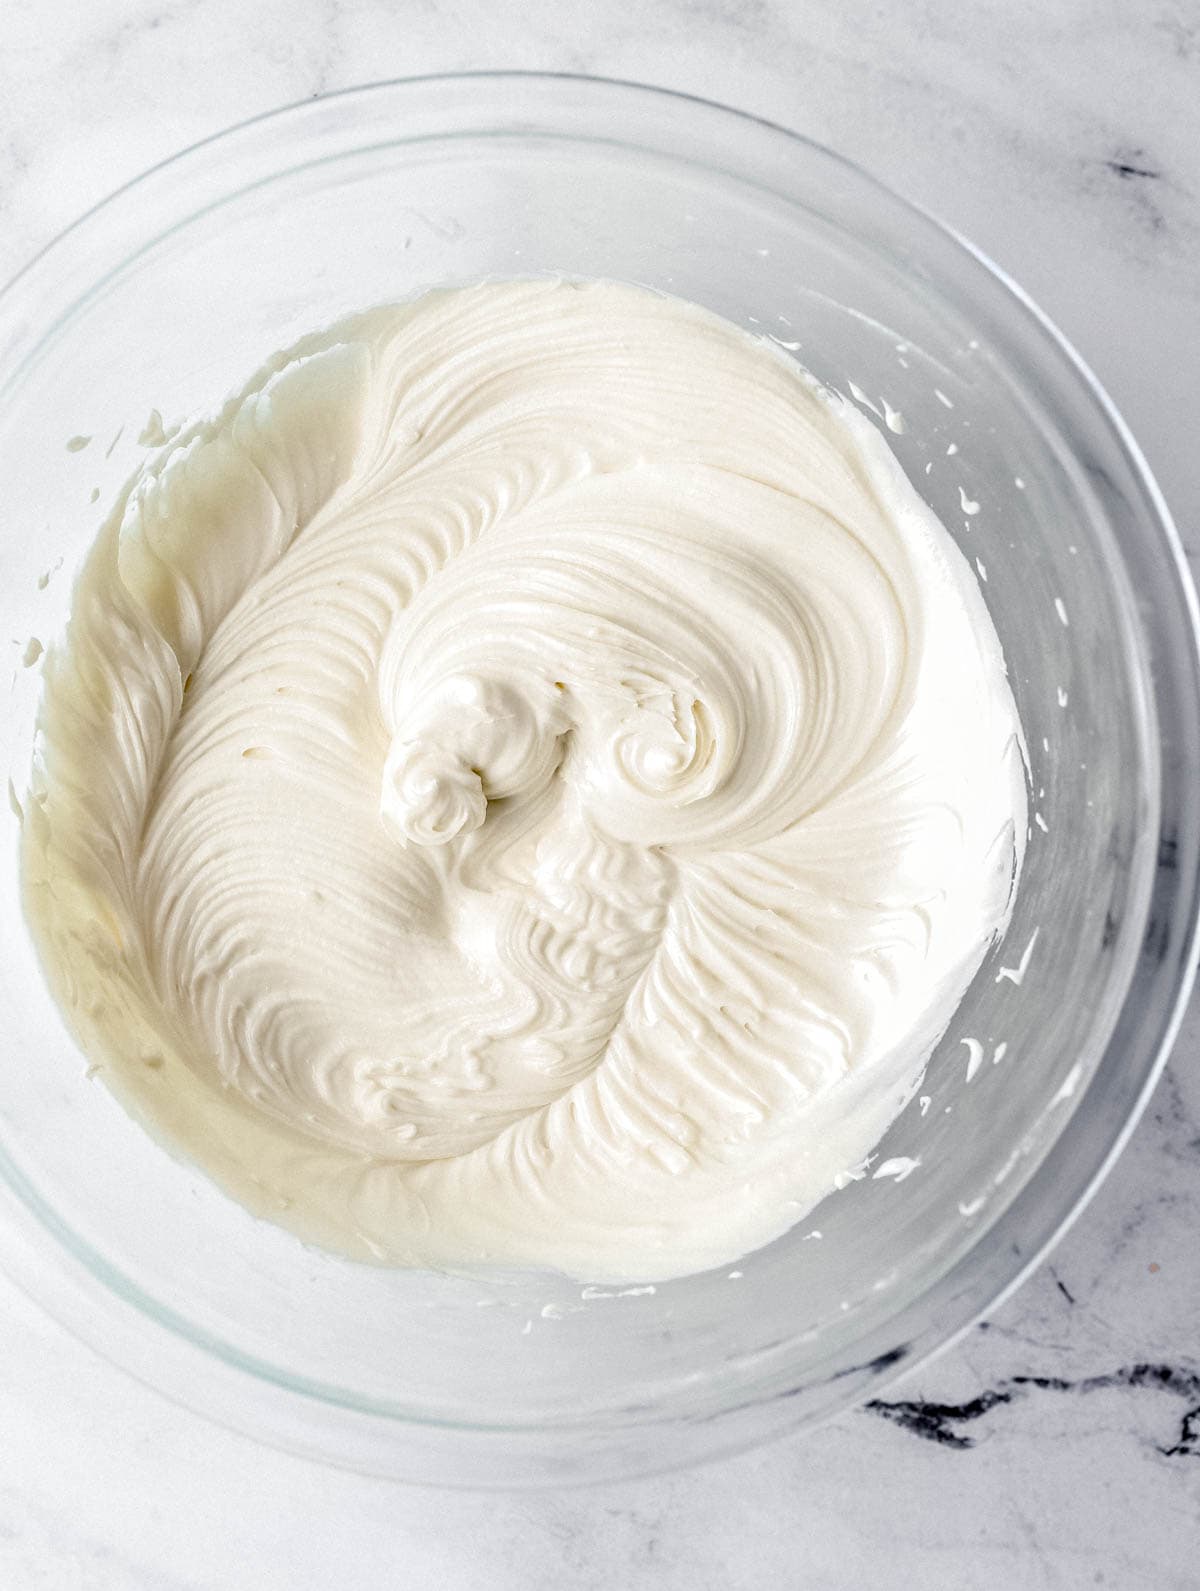 Cake frosting ingredients combined in large glass mixing bowl on marble surface. 